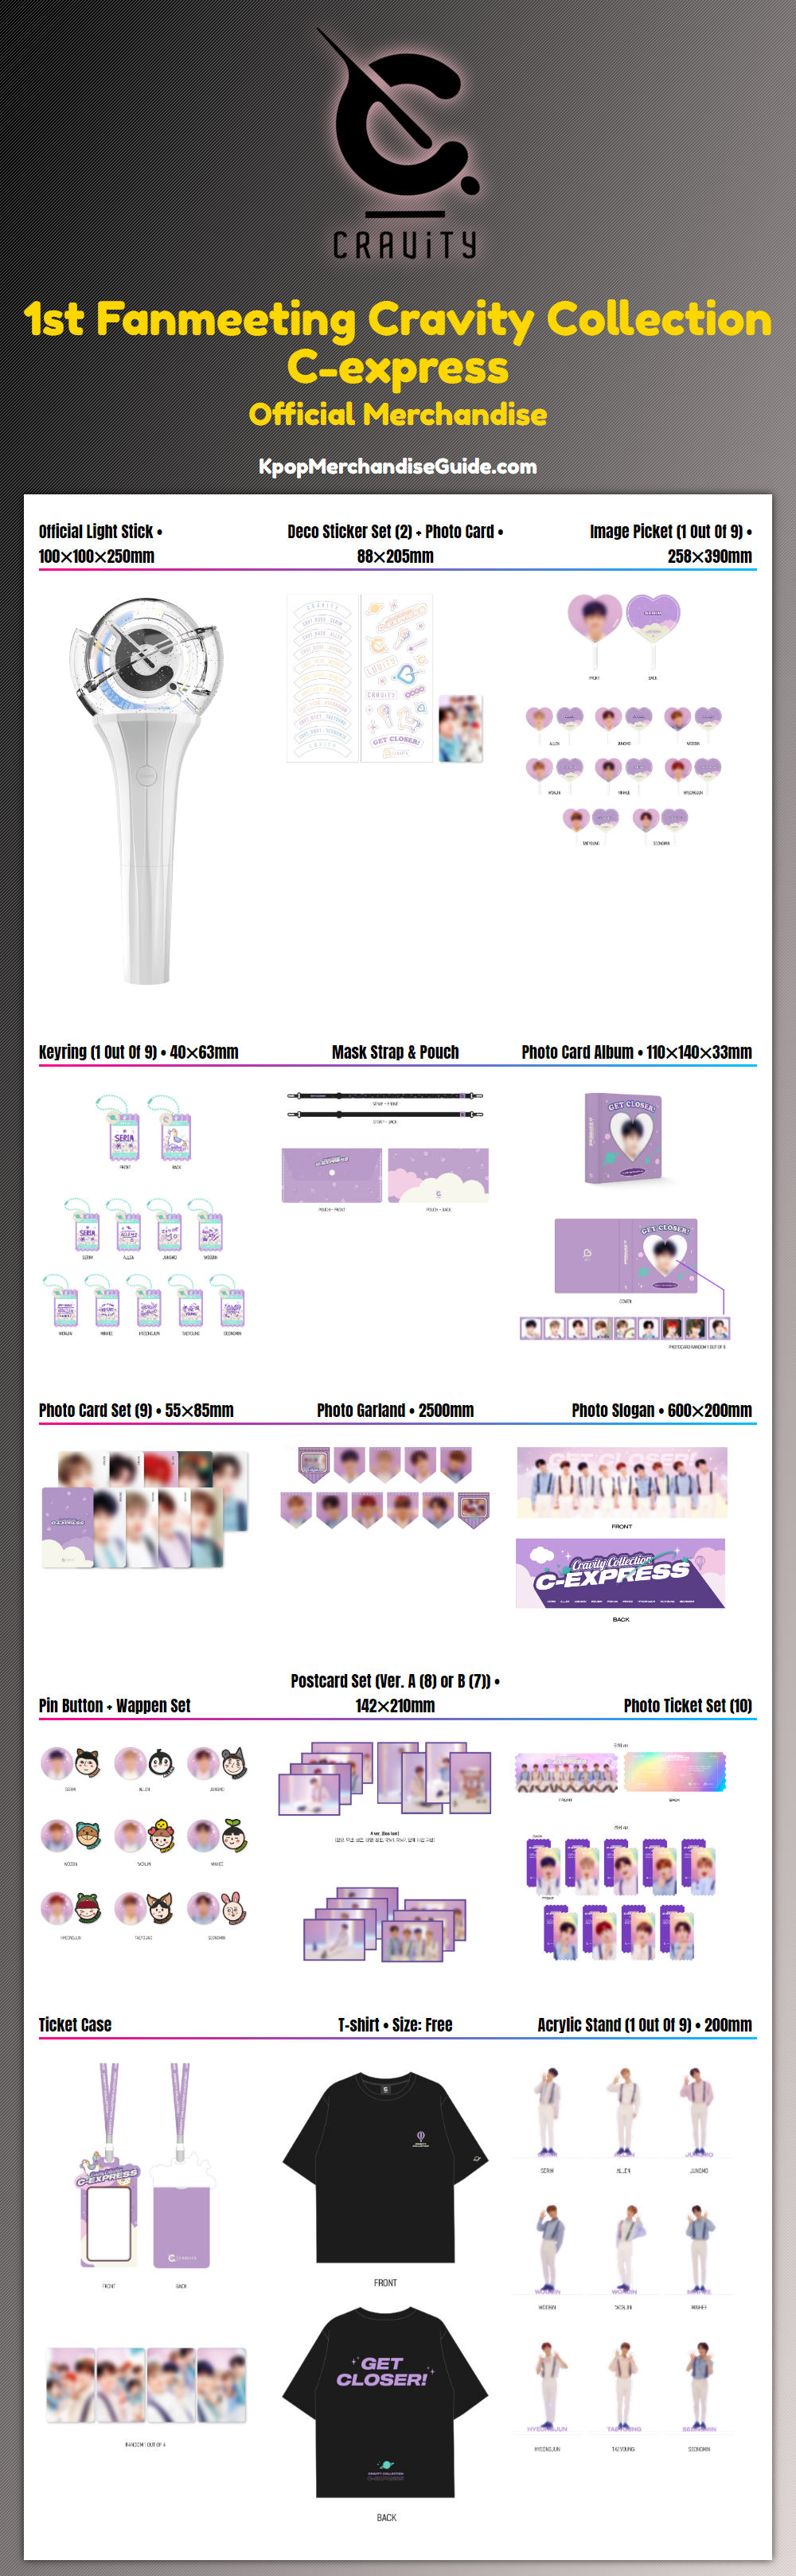 Cravity 1st Fanmeeting Cravity Collection C-express Merchandise